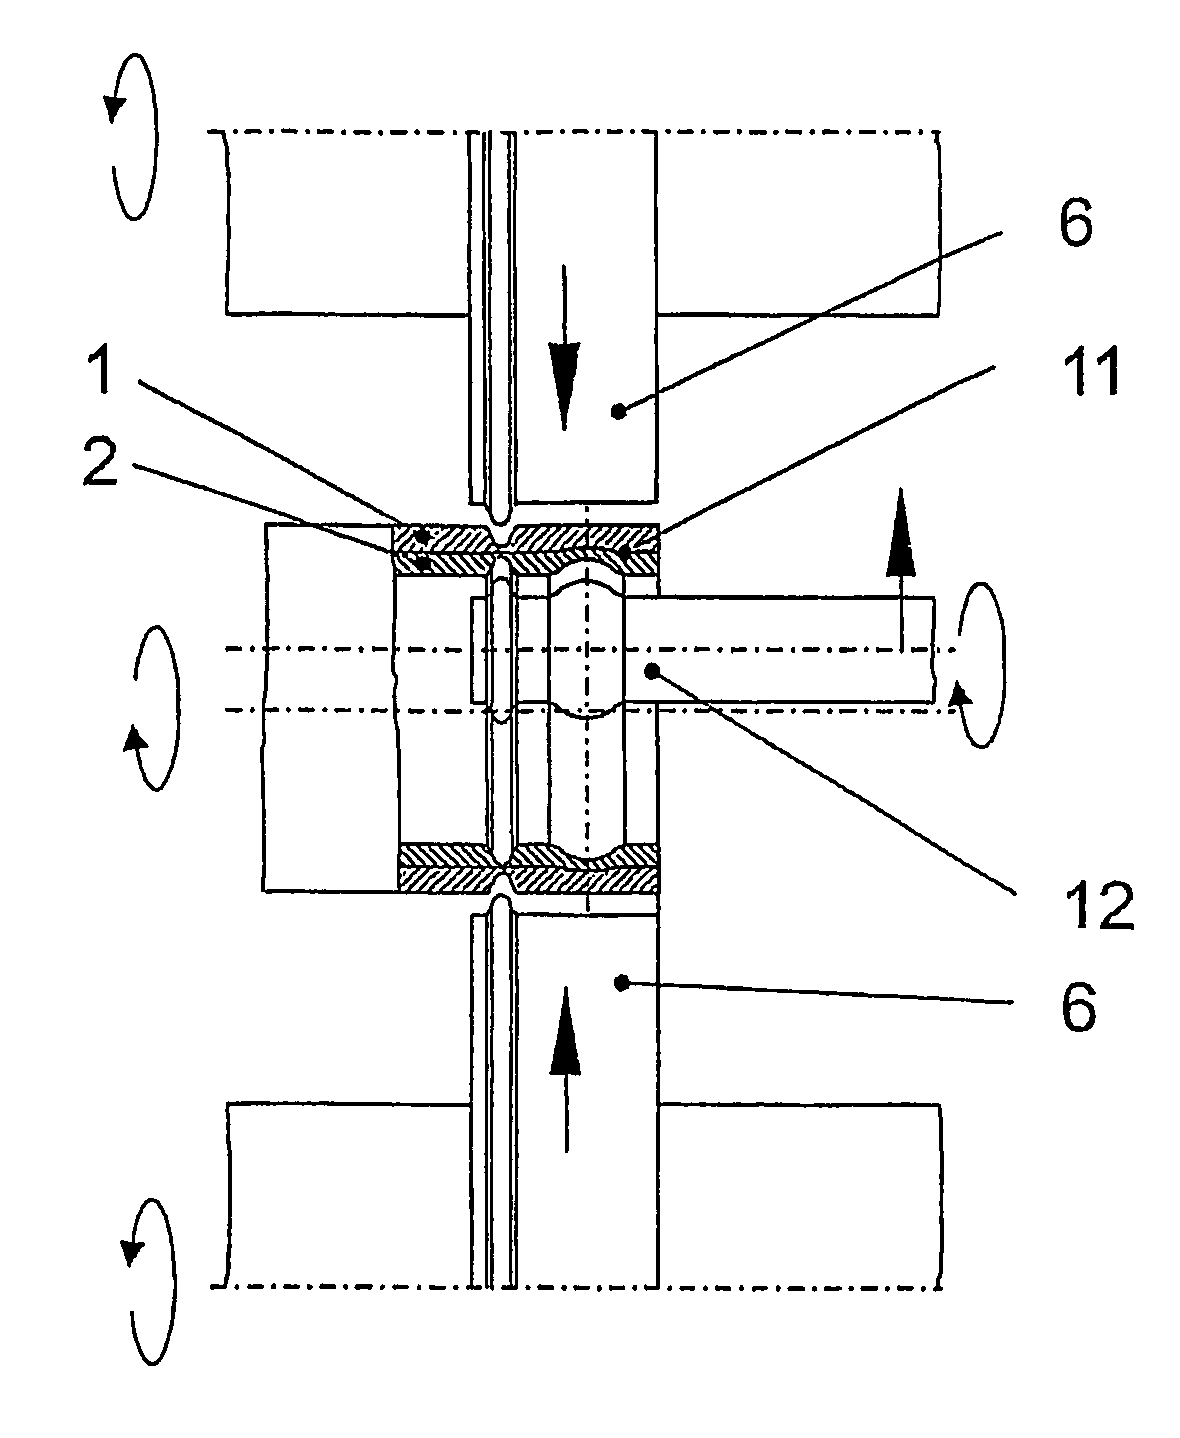 Annular composite workpieces and a cold-rolling method for producing said workpieces